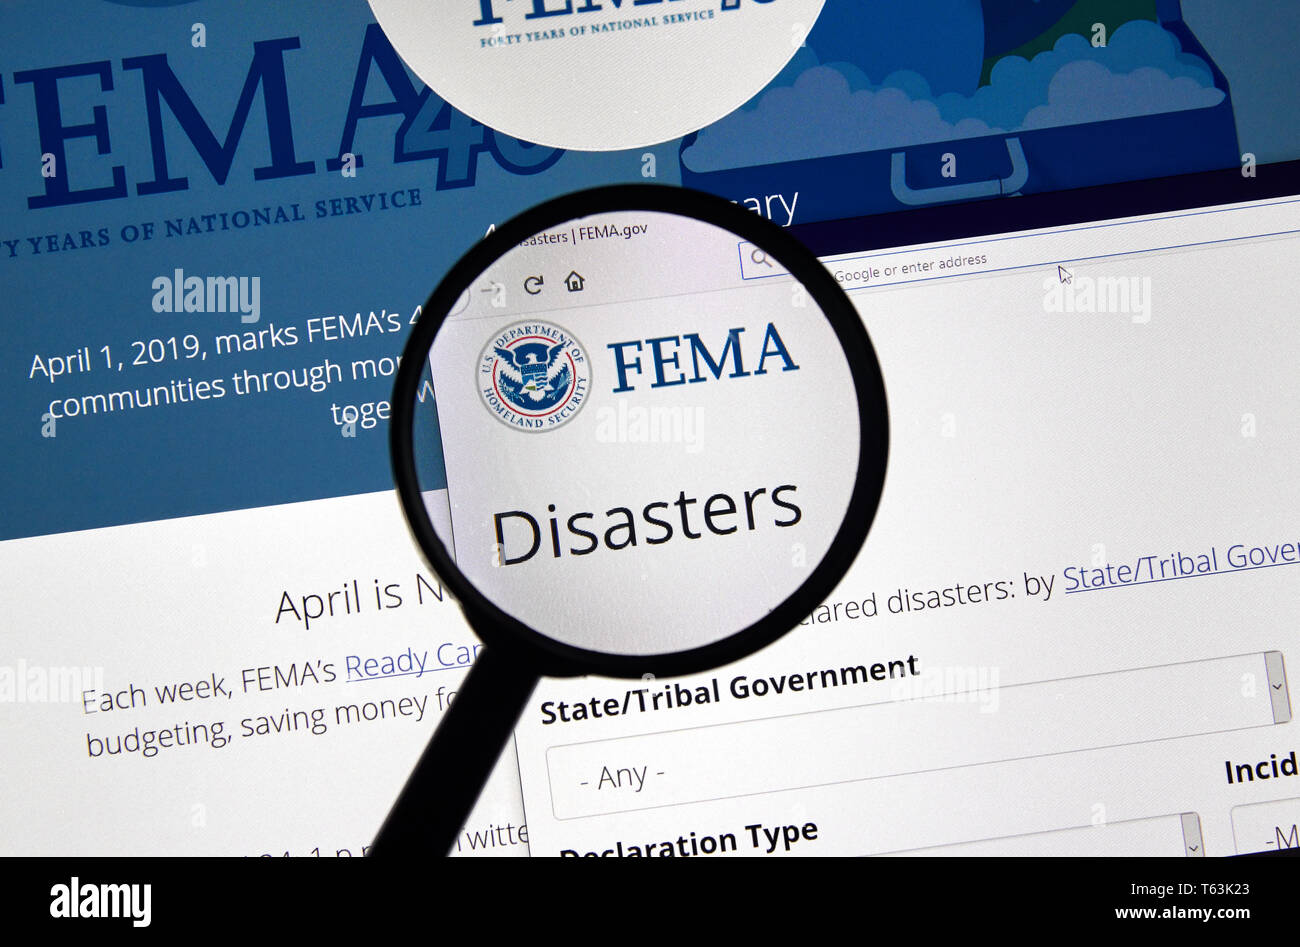 MONTREAL, CANADA - APRIL 24, 2019 : Fema.gov Disasters USA Government home page under magnifying glass. FEMA is The Federal Emergency Management Agenc Stock Photo